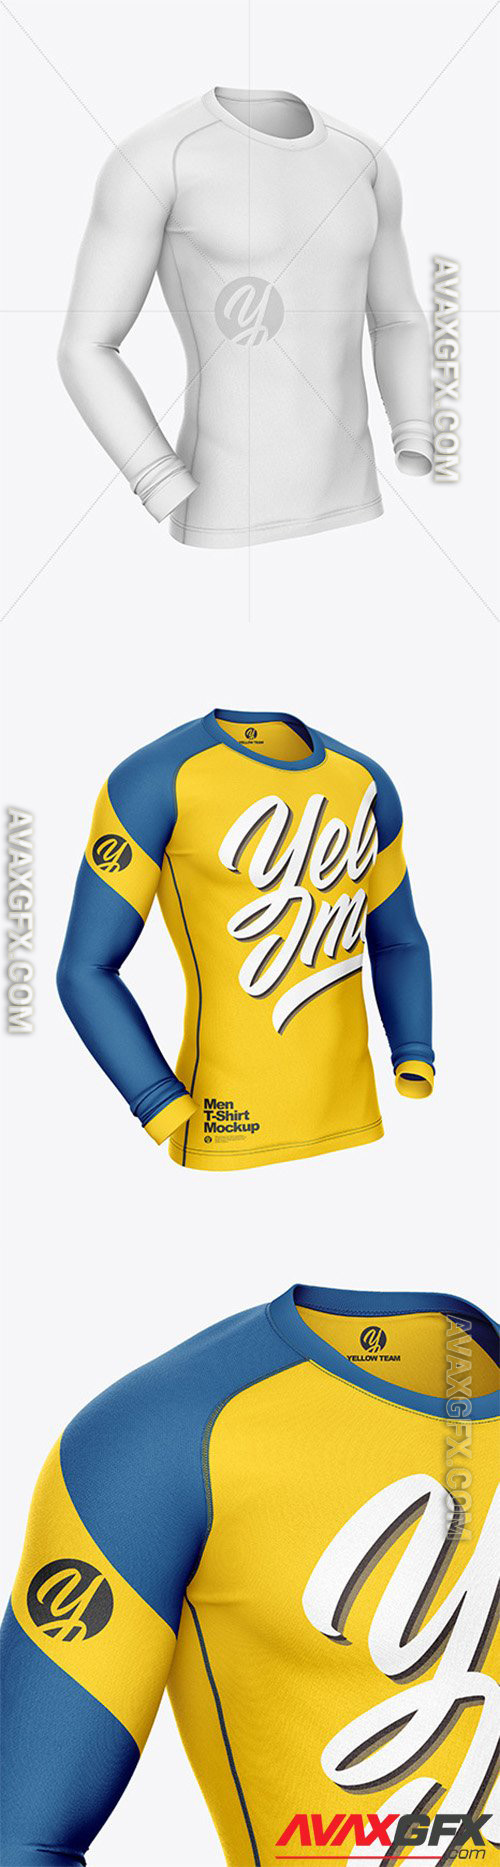 Long Sleeve Compression T-Shirt Mockup – Front Half Side View 54953